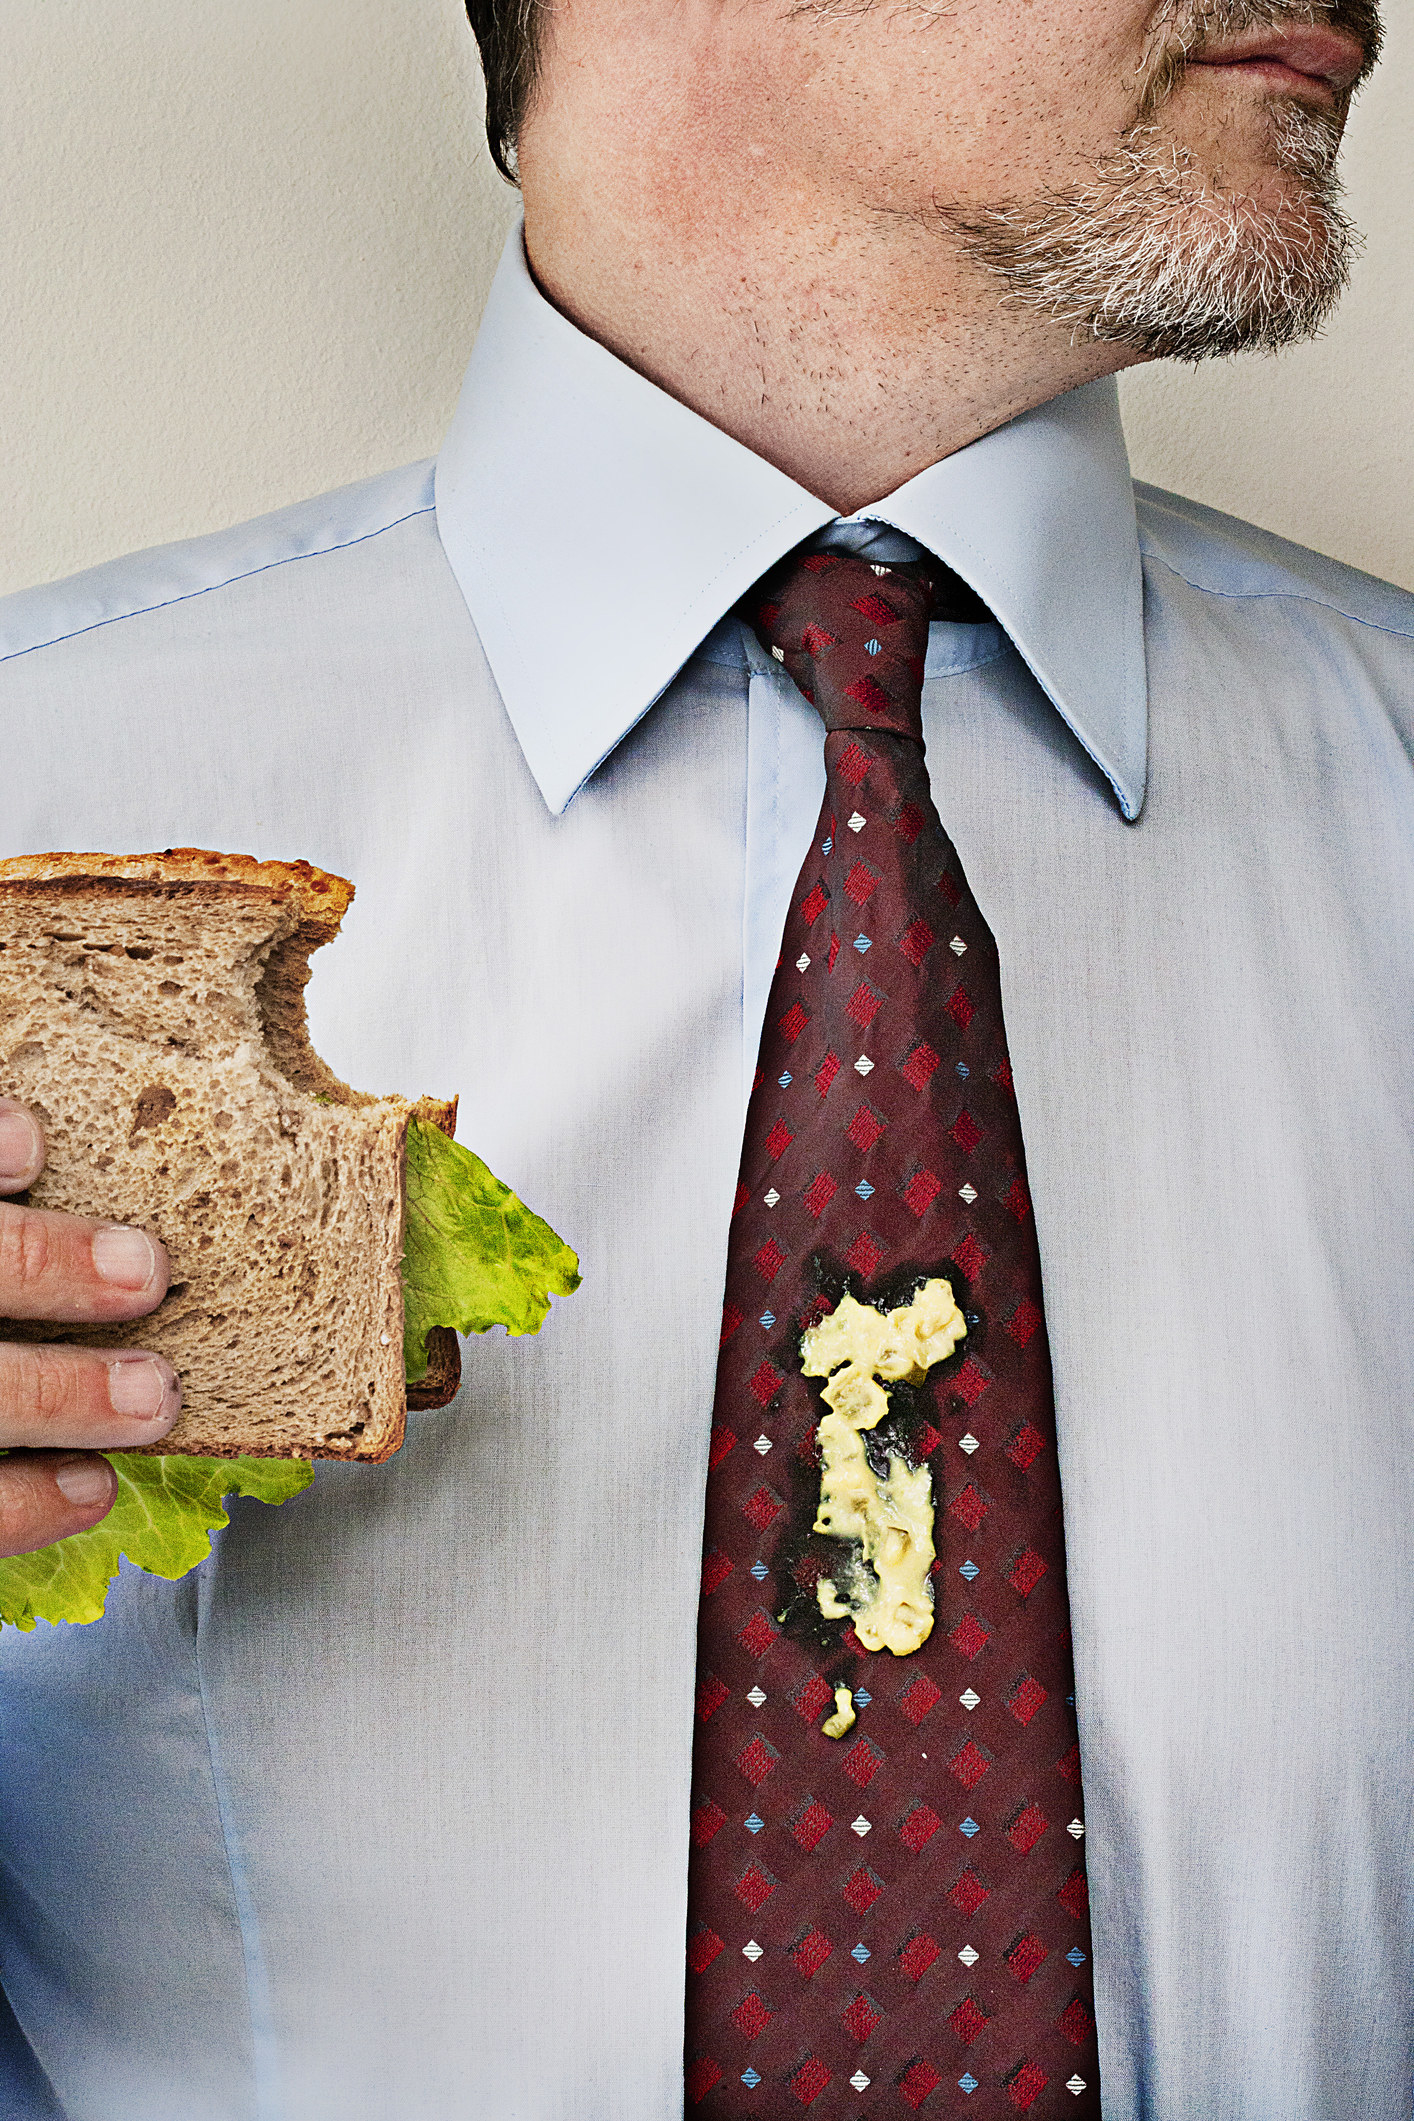 a man with food on his tie